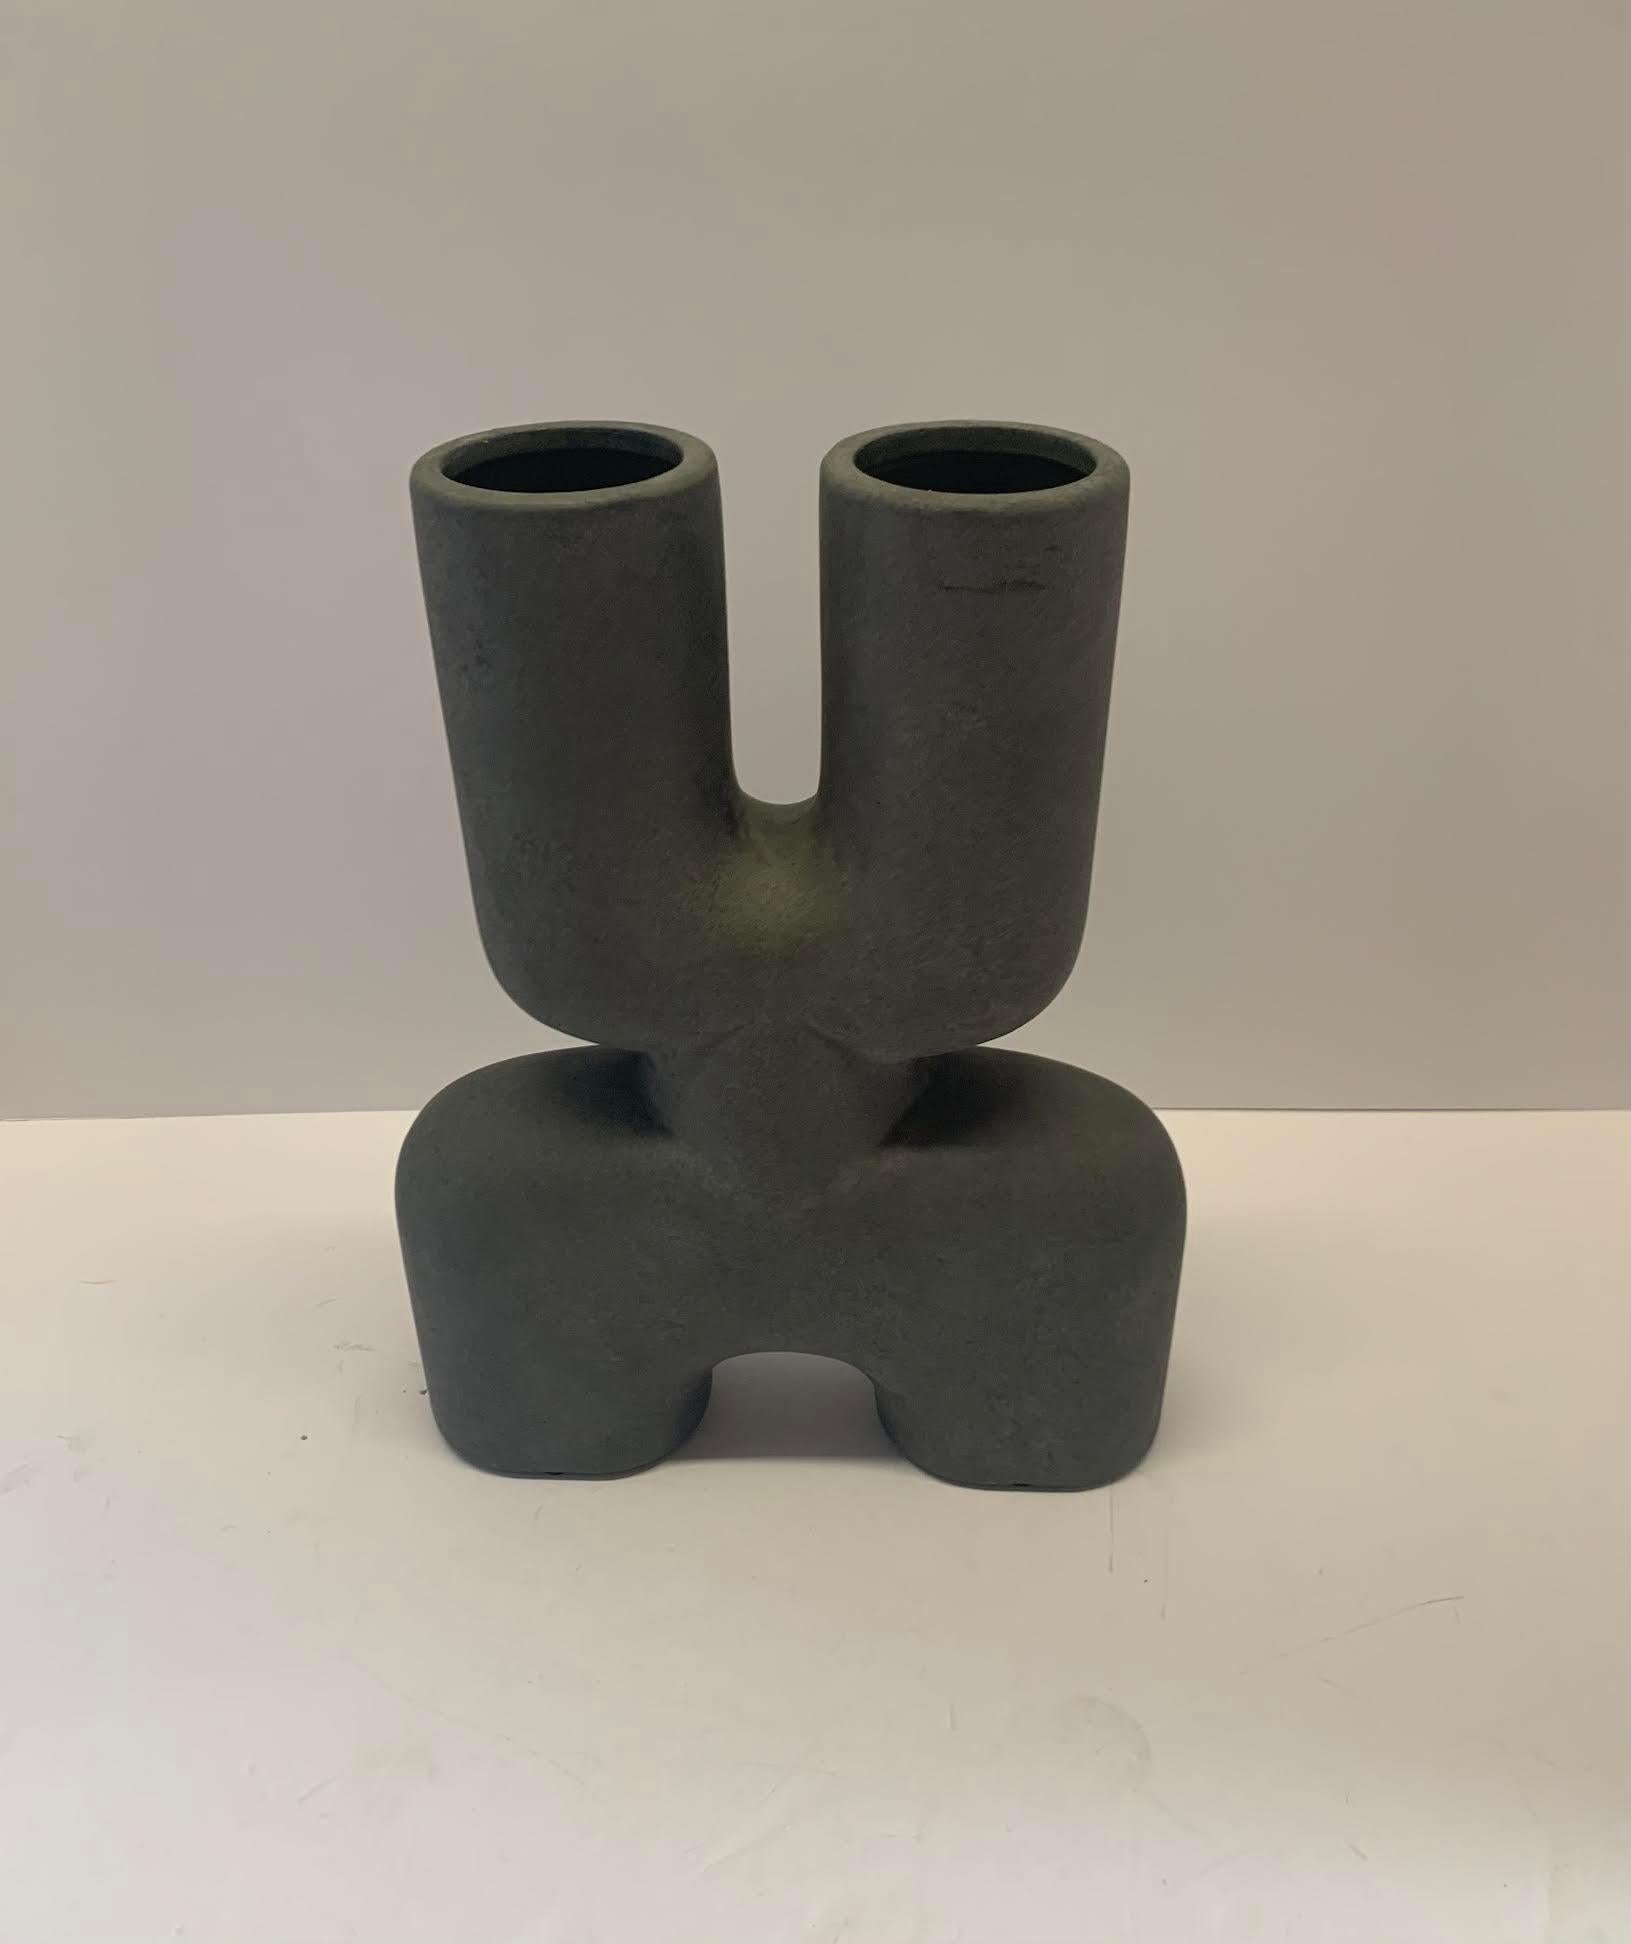 Contemporary Danish matte grey finish tall vase with double top spout and two bottom spouts
Very sculptural in design
Three available.
 